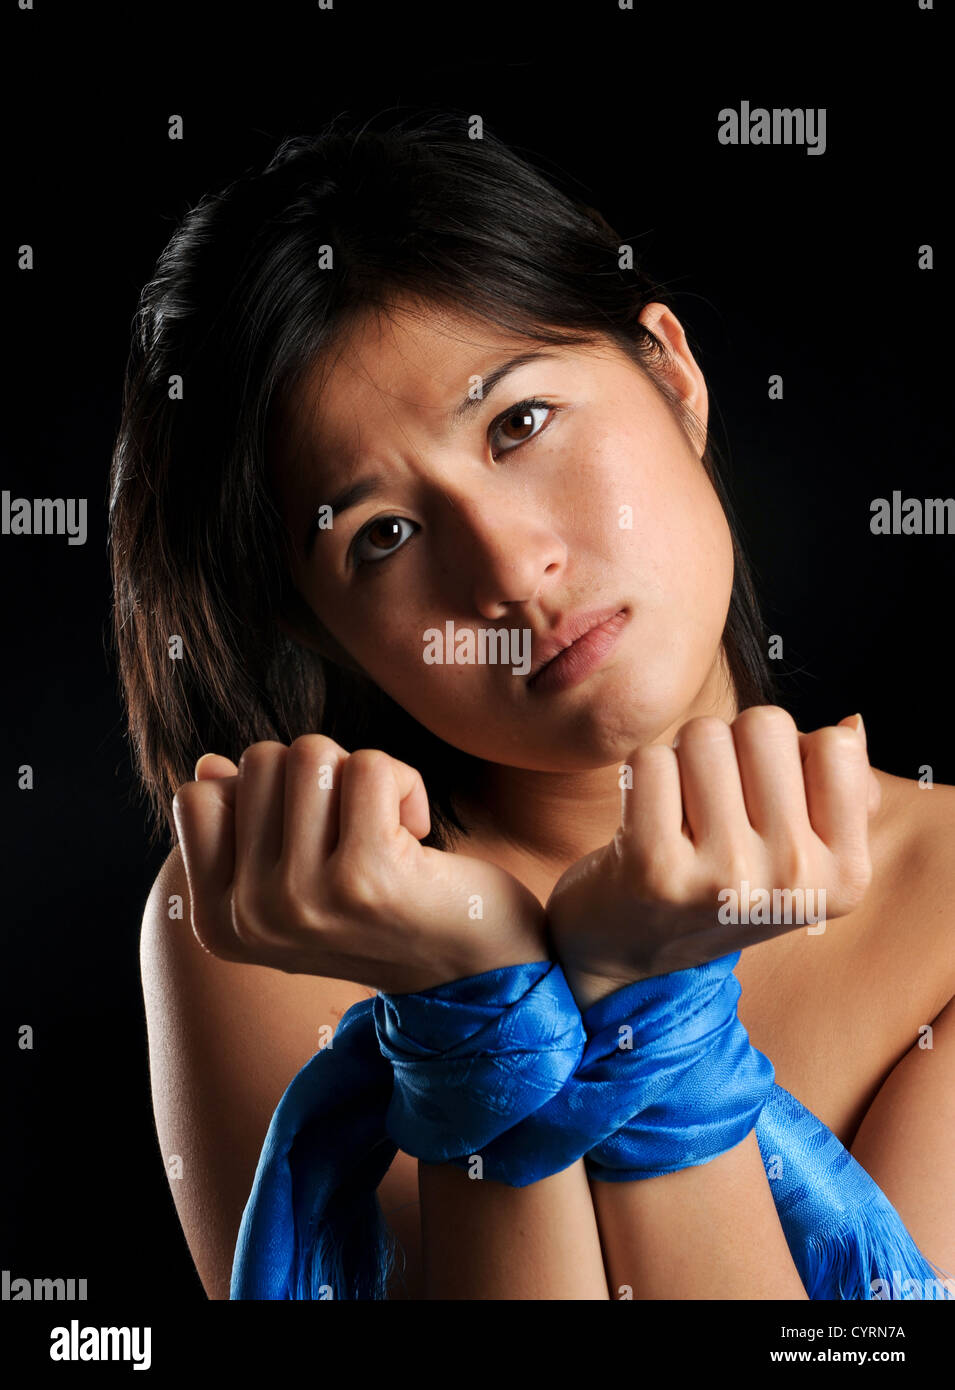 Asian Girl Tied Up Against Her Will Is Unhappy Stock Photo Alamy